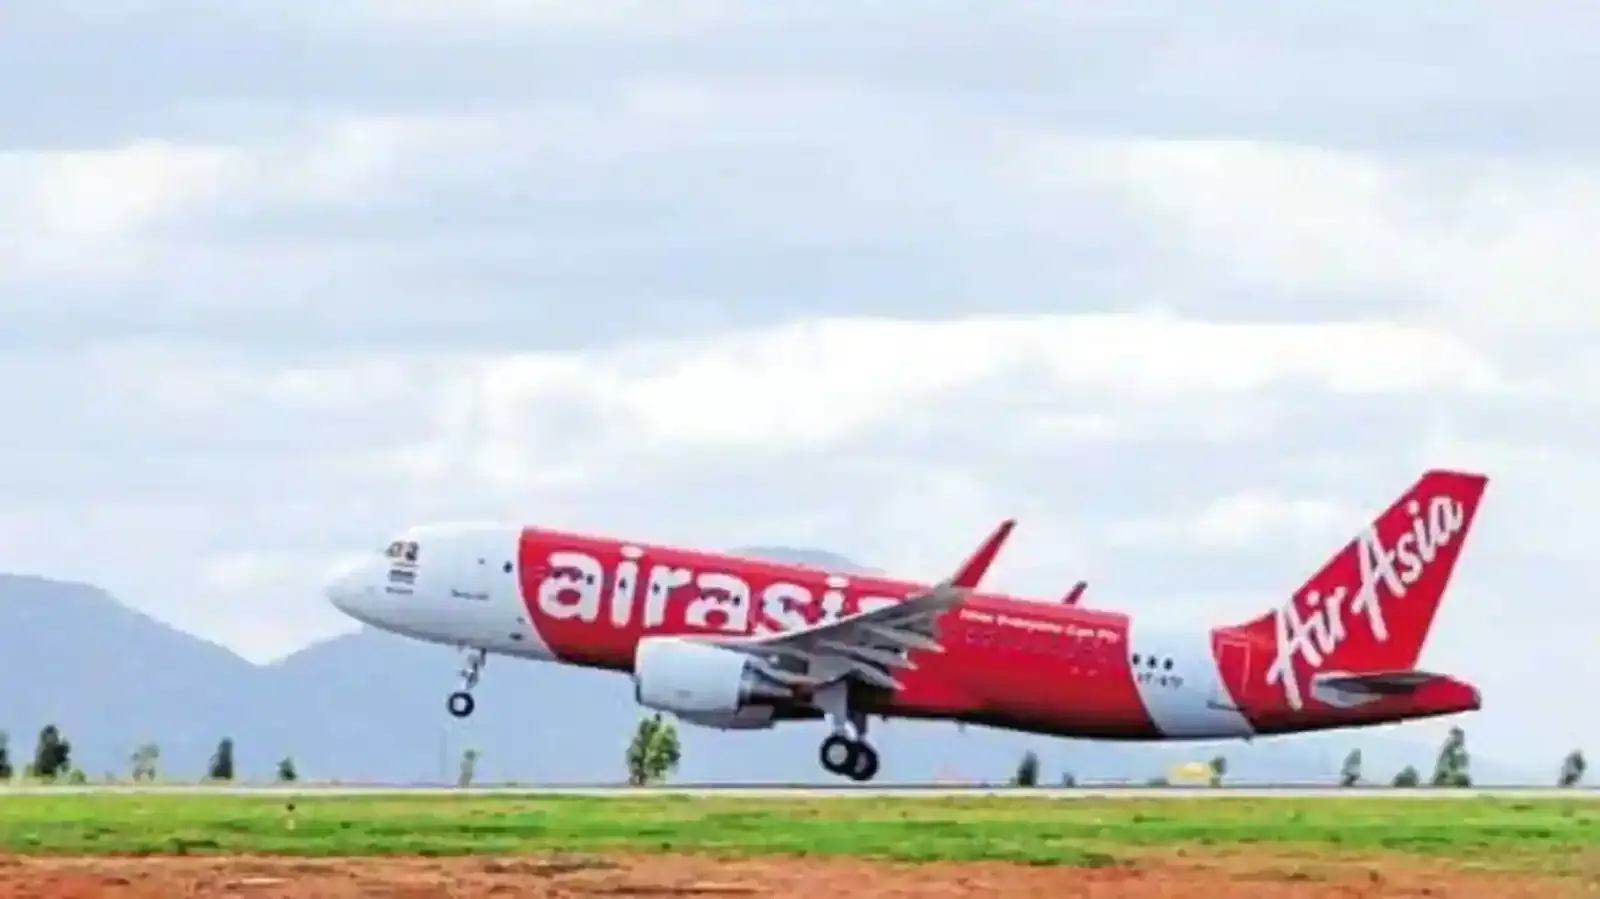 Breach of protocol: AirAsia takes off without Governor on board